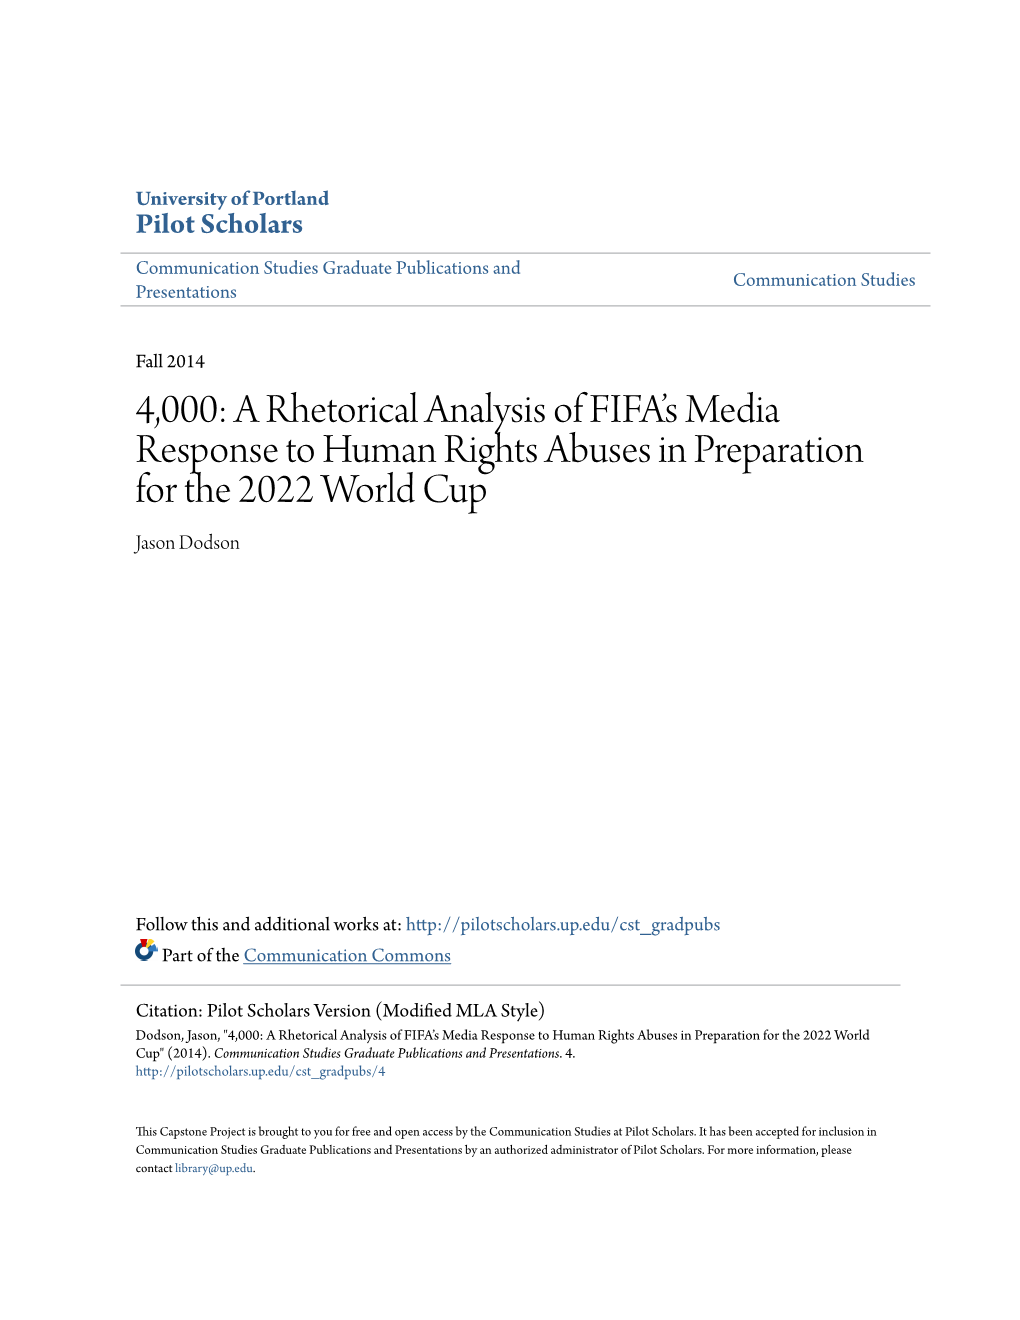 A Rhetorical Analysis of FIFA's Media Response to Human Rights Abuses